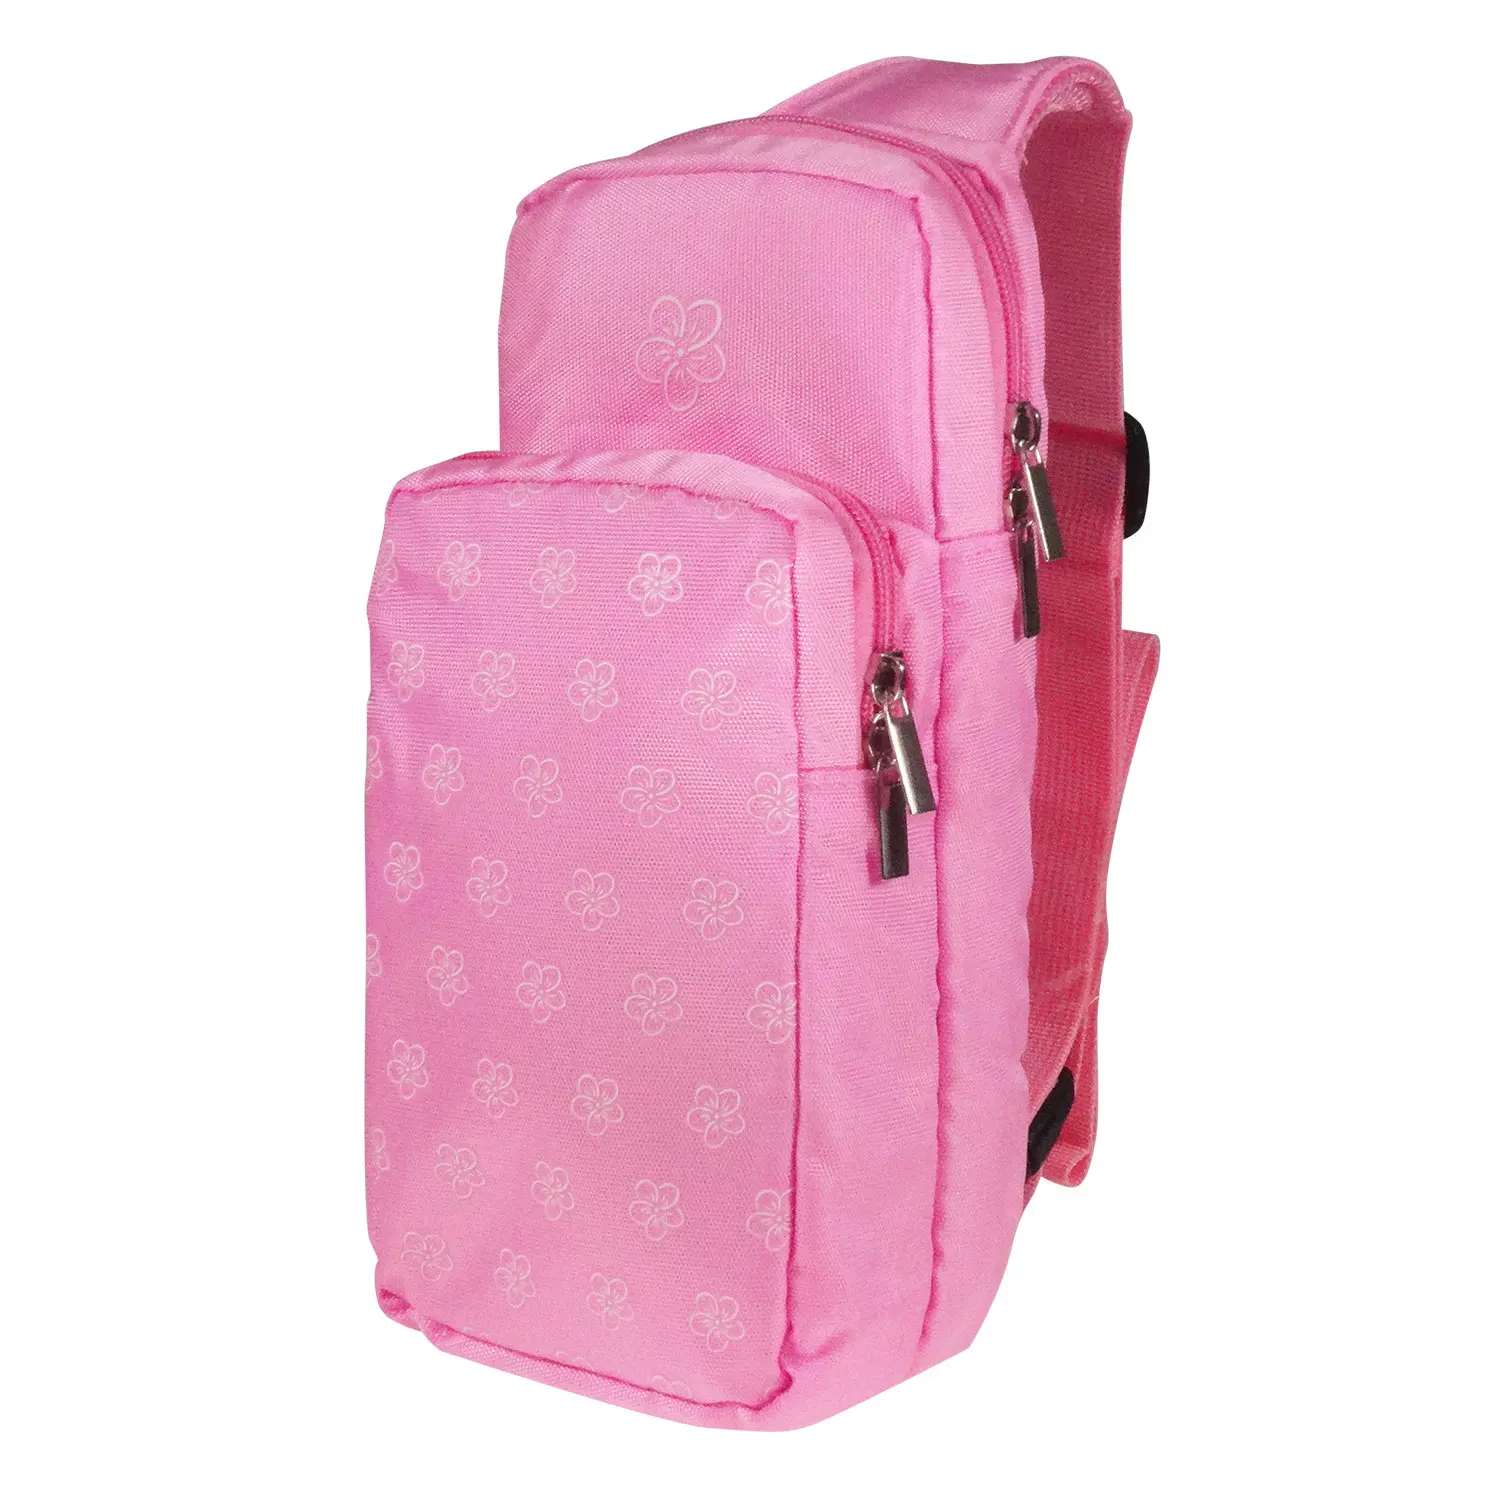 

2021 New PS5 PS4 Backpack Travel Carrying Case Portable Storage Bag For nintendo Switch Game Console Accessories, Yellow pink cherry blossom powder